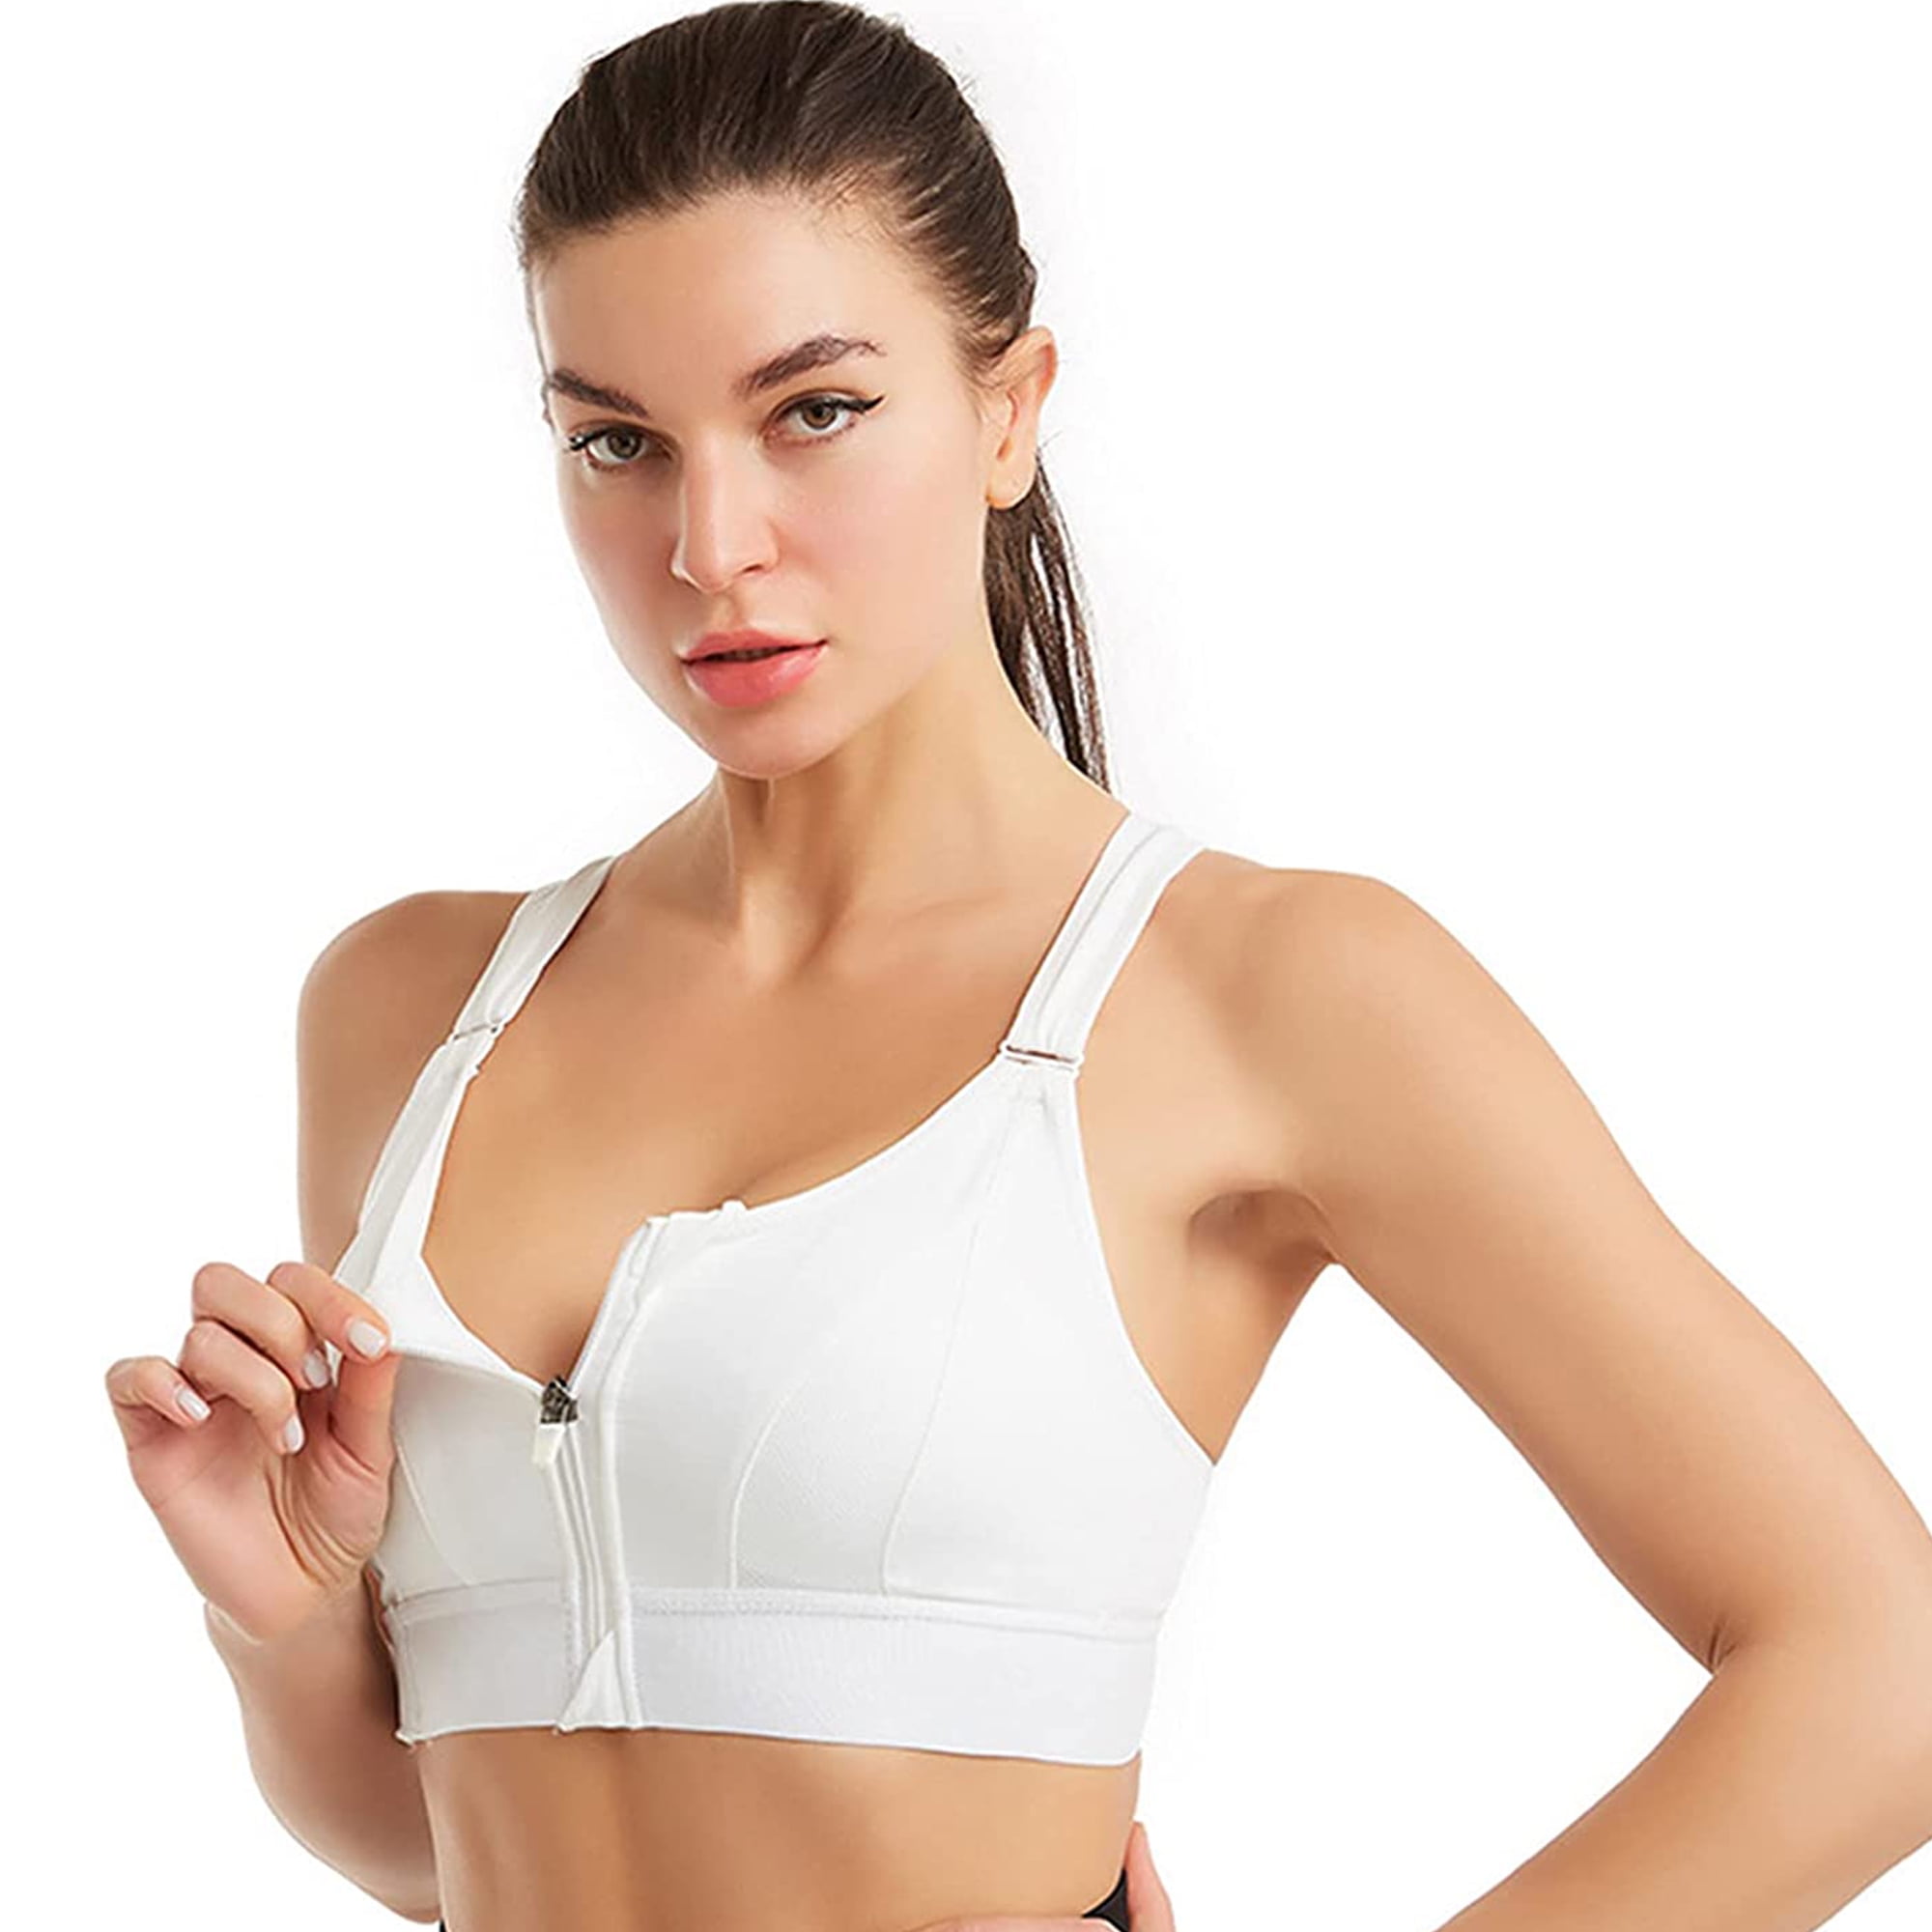 Sports Bras - High Impact & Support Sports Bras